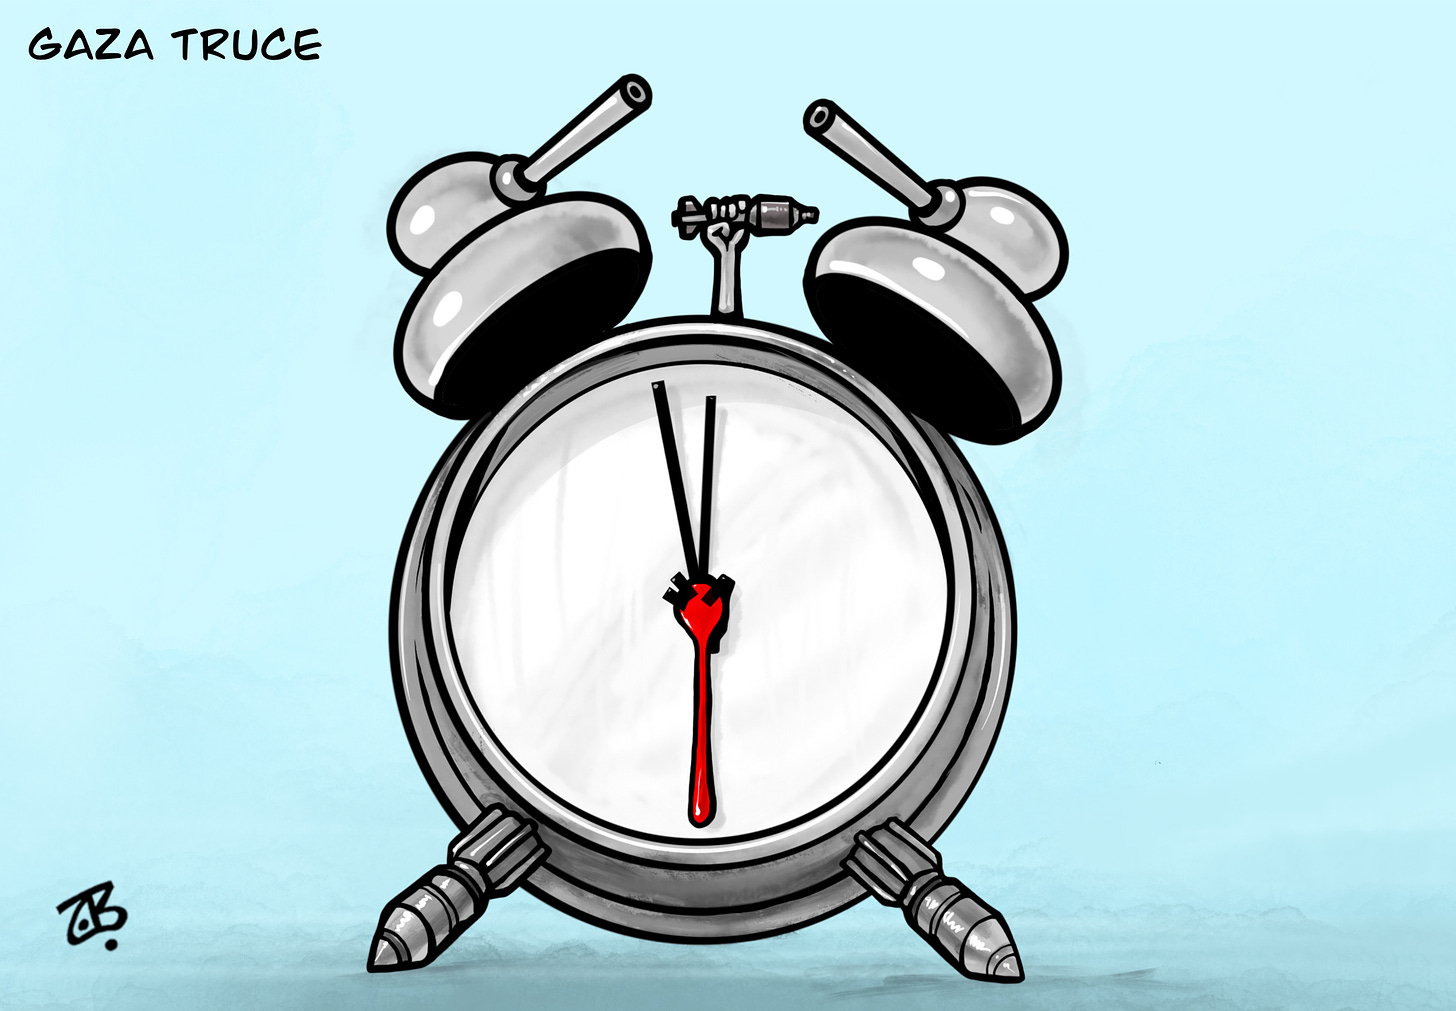 Cartoon showing an old-fashioned alarm clock with the caption 'Gaza truce' above it. The bells of the alarm clock are tanks while the dials are fingers making a peace sign with a drop of blood running between them. The feet of the clock are bombs.